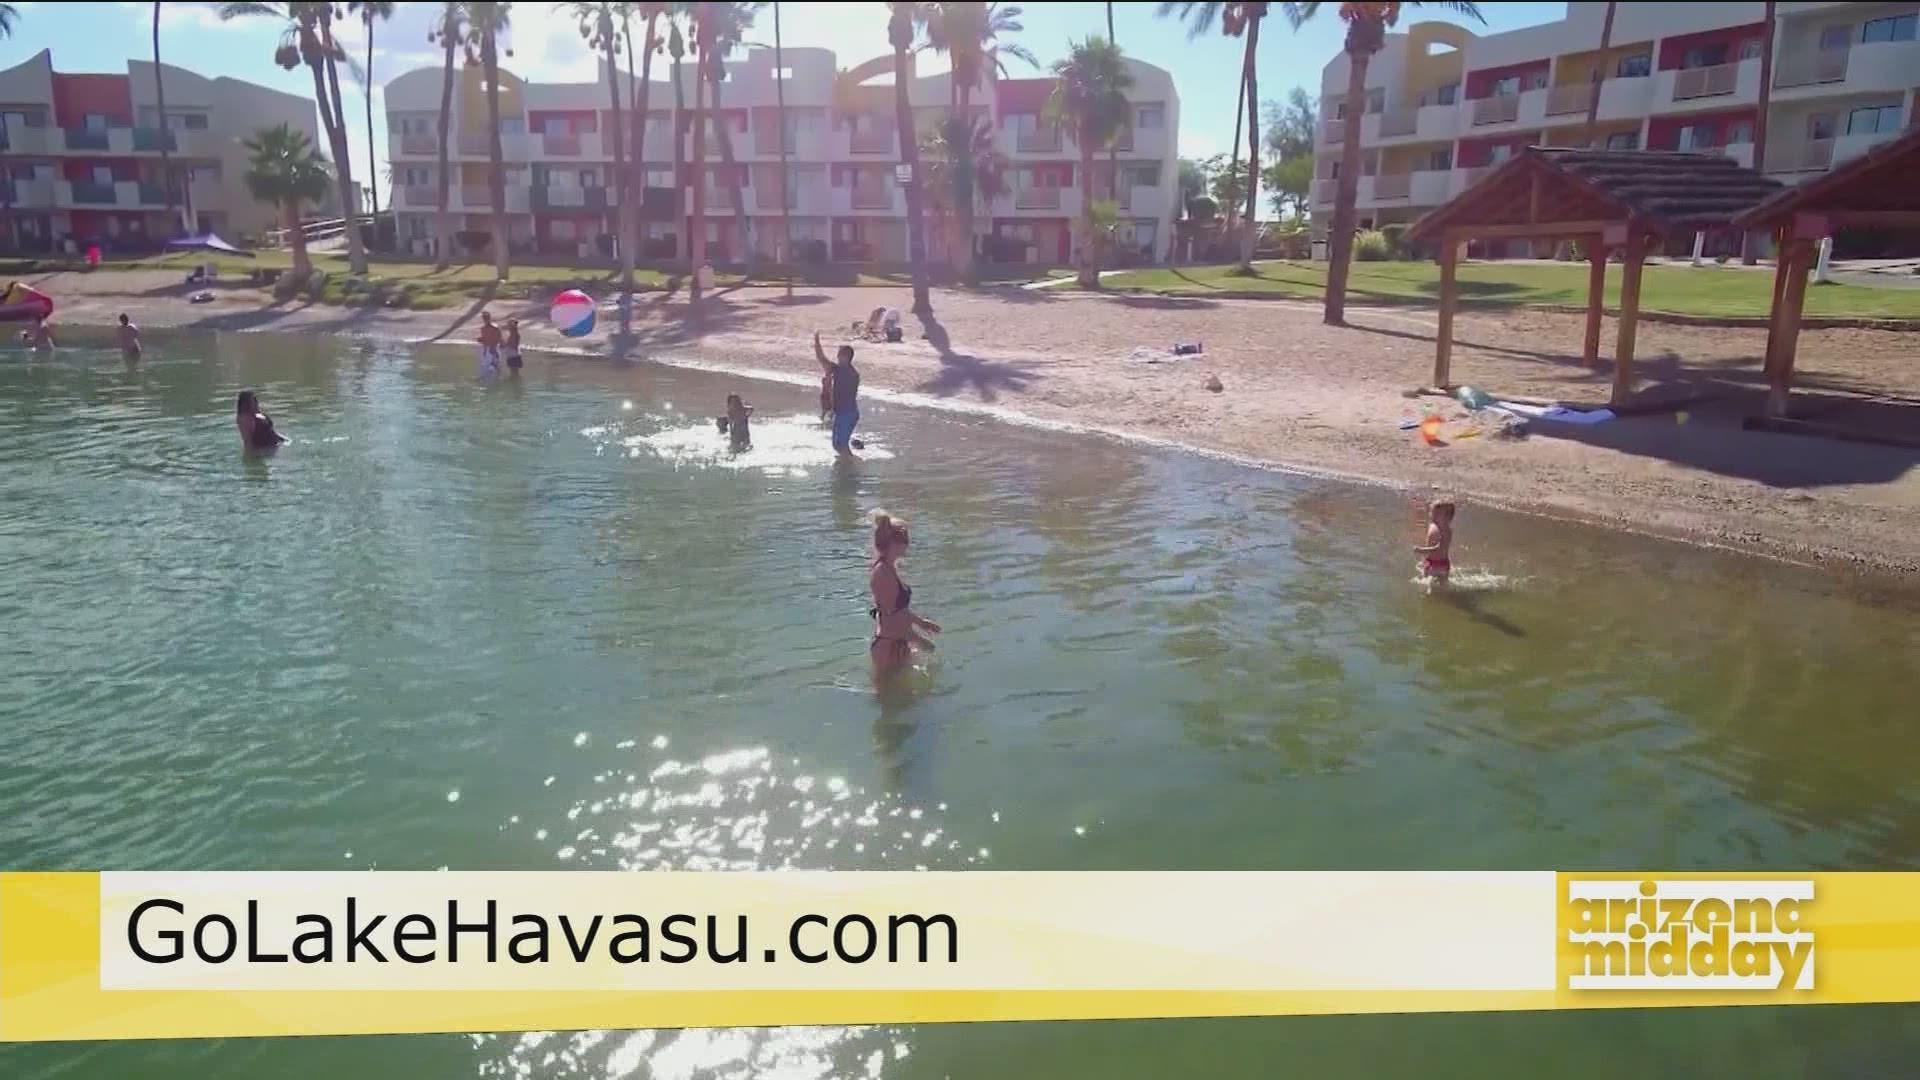 From swimming to fishing to biking and more, Lake Havasu Mayor Cal Sheehy shares all the fun families can have while visiting.